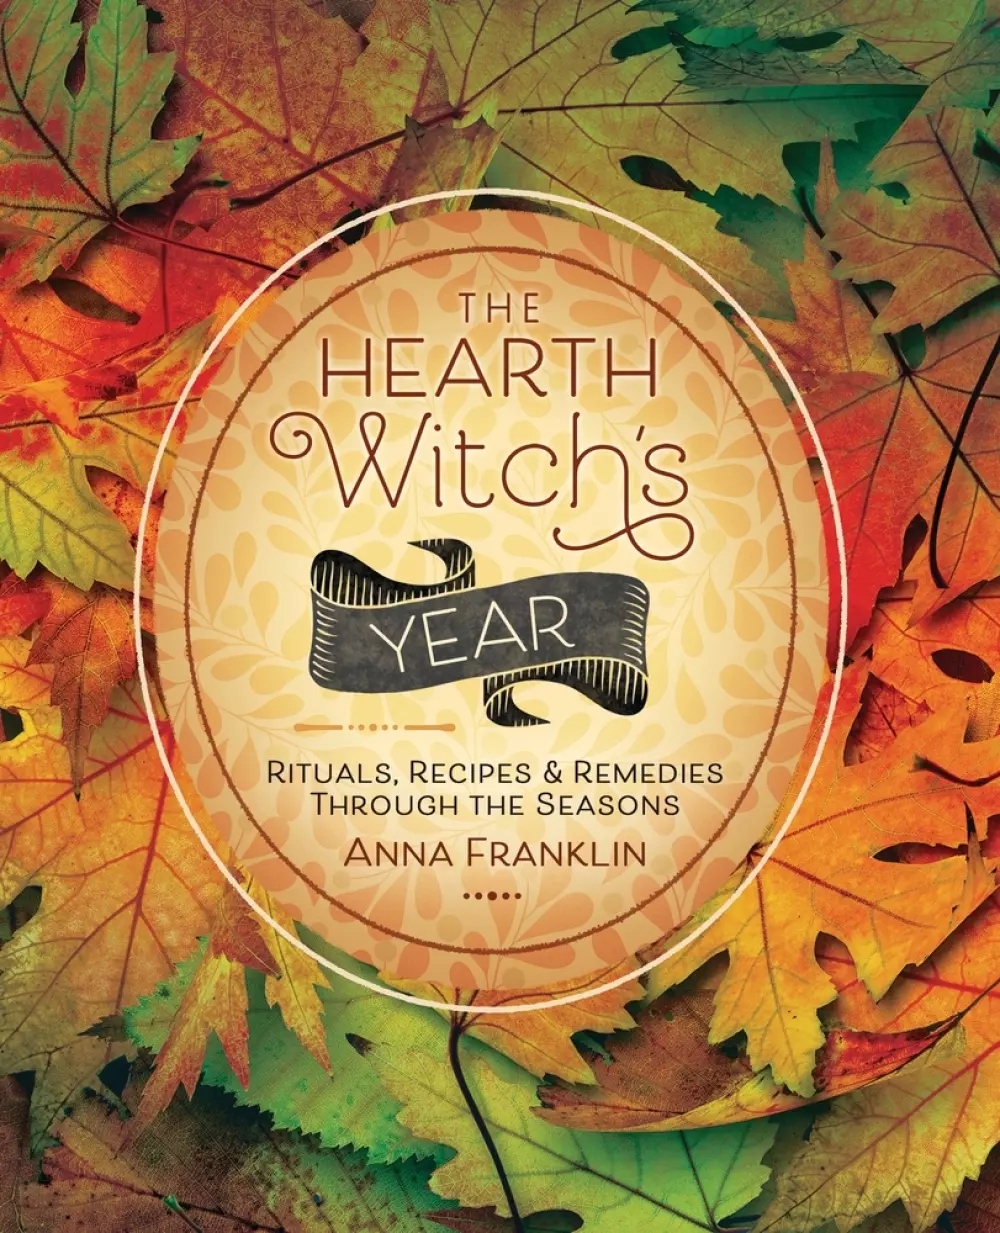 Anna Franklin, Witchcraft, Hearth Witch, Wicca in The Kitchen, Wicca, Paganism, Pegainsme, Hearth Witch's Year, Bøker, Urkulturer,sjamanisme & mystikk, Rituals, Recipes & Remedies Through the Seasons